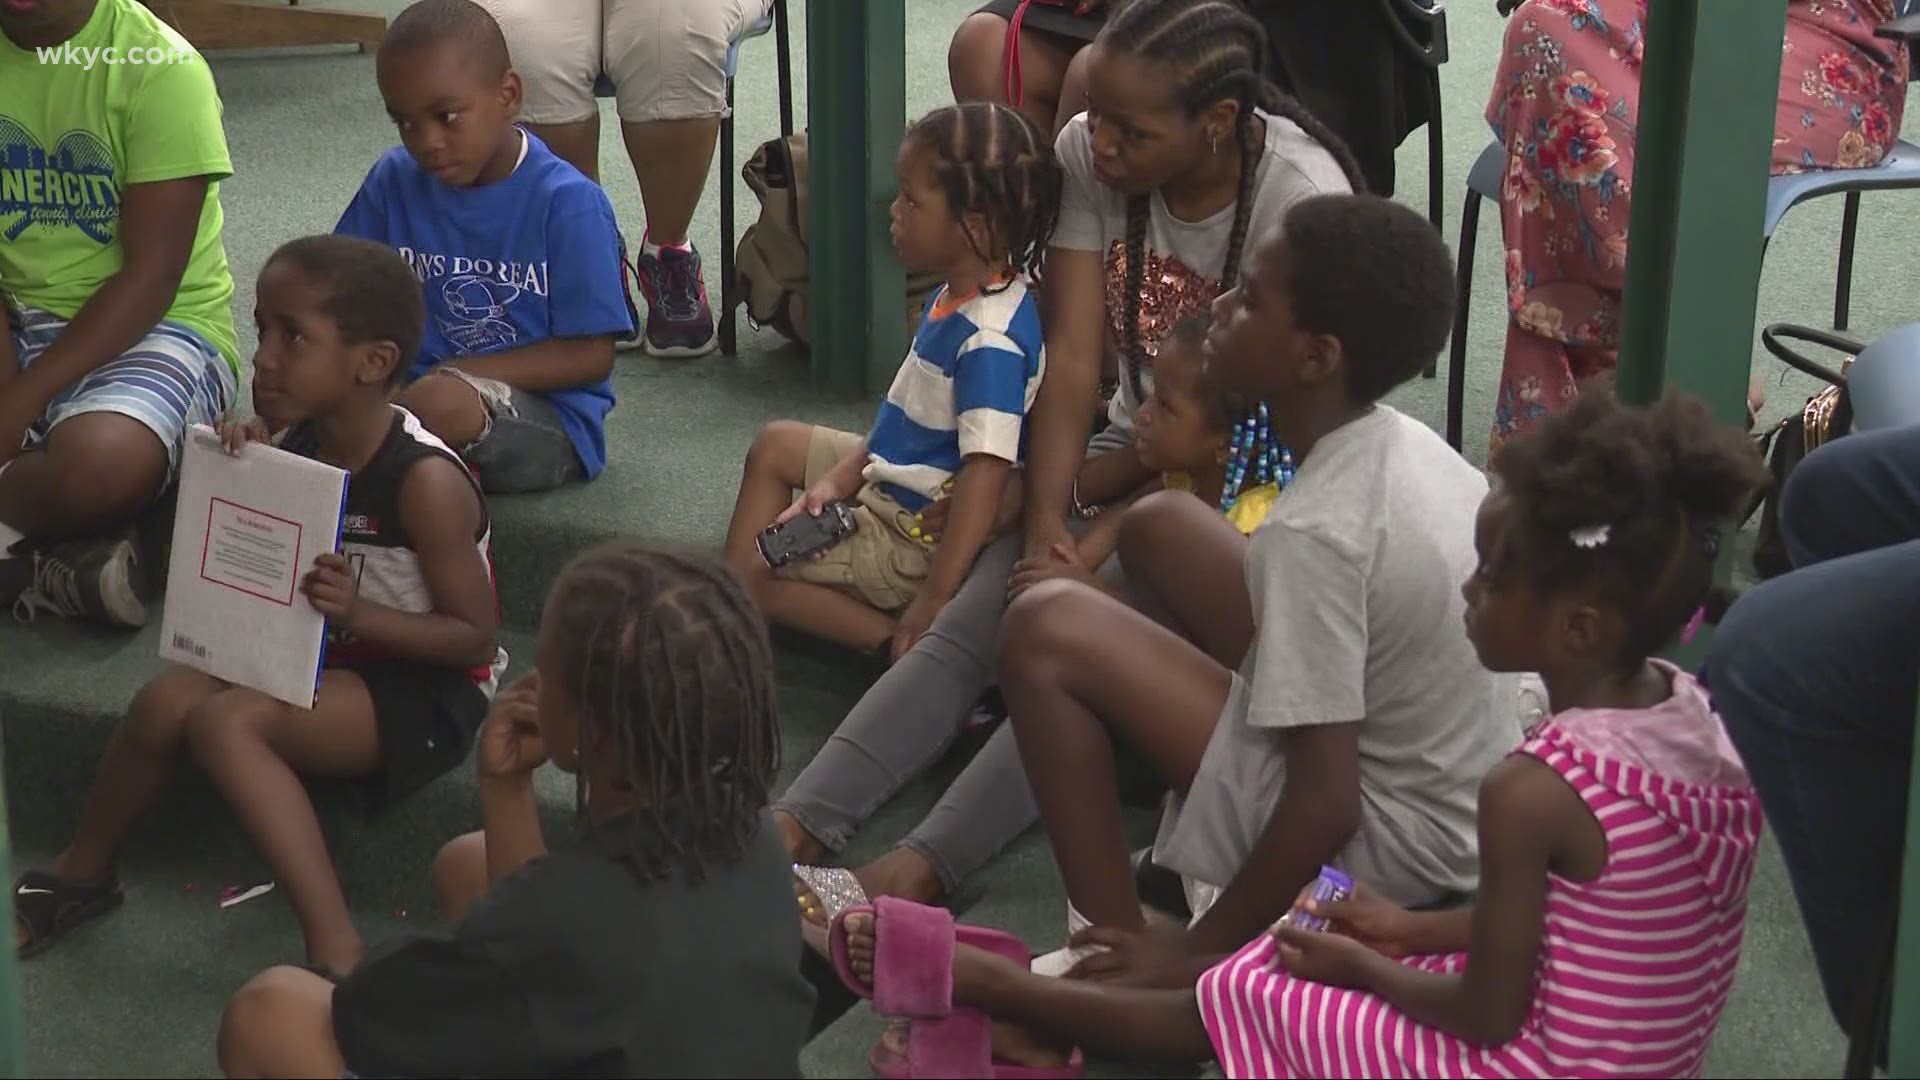 "Read Like Me" aims to create more black male teachers through reading to youth. 3News' January Keaton has the story.